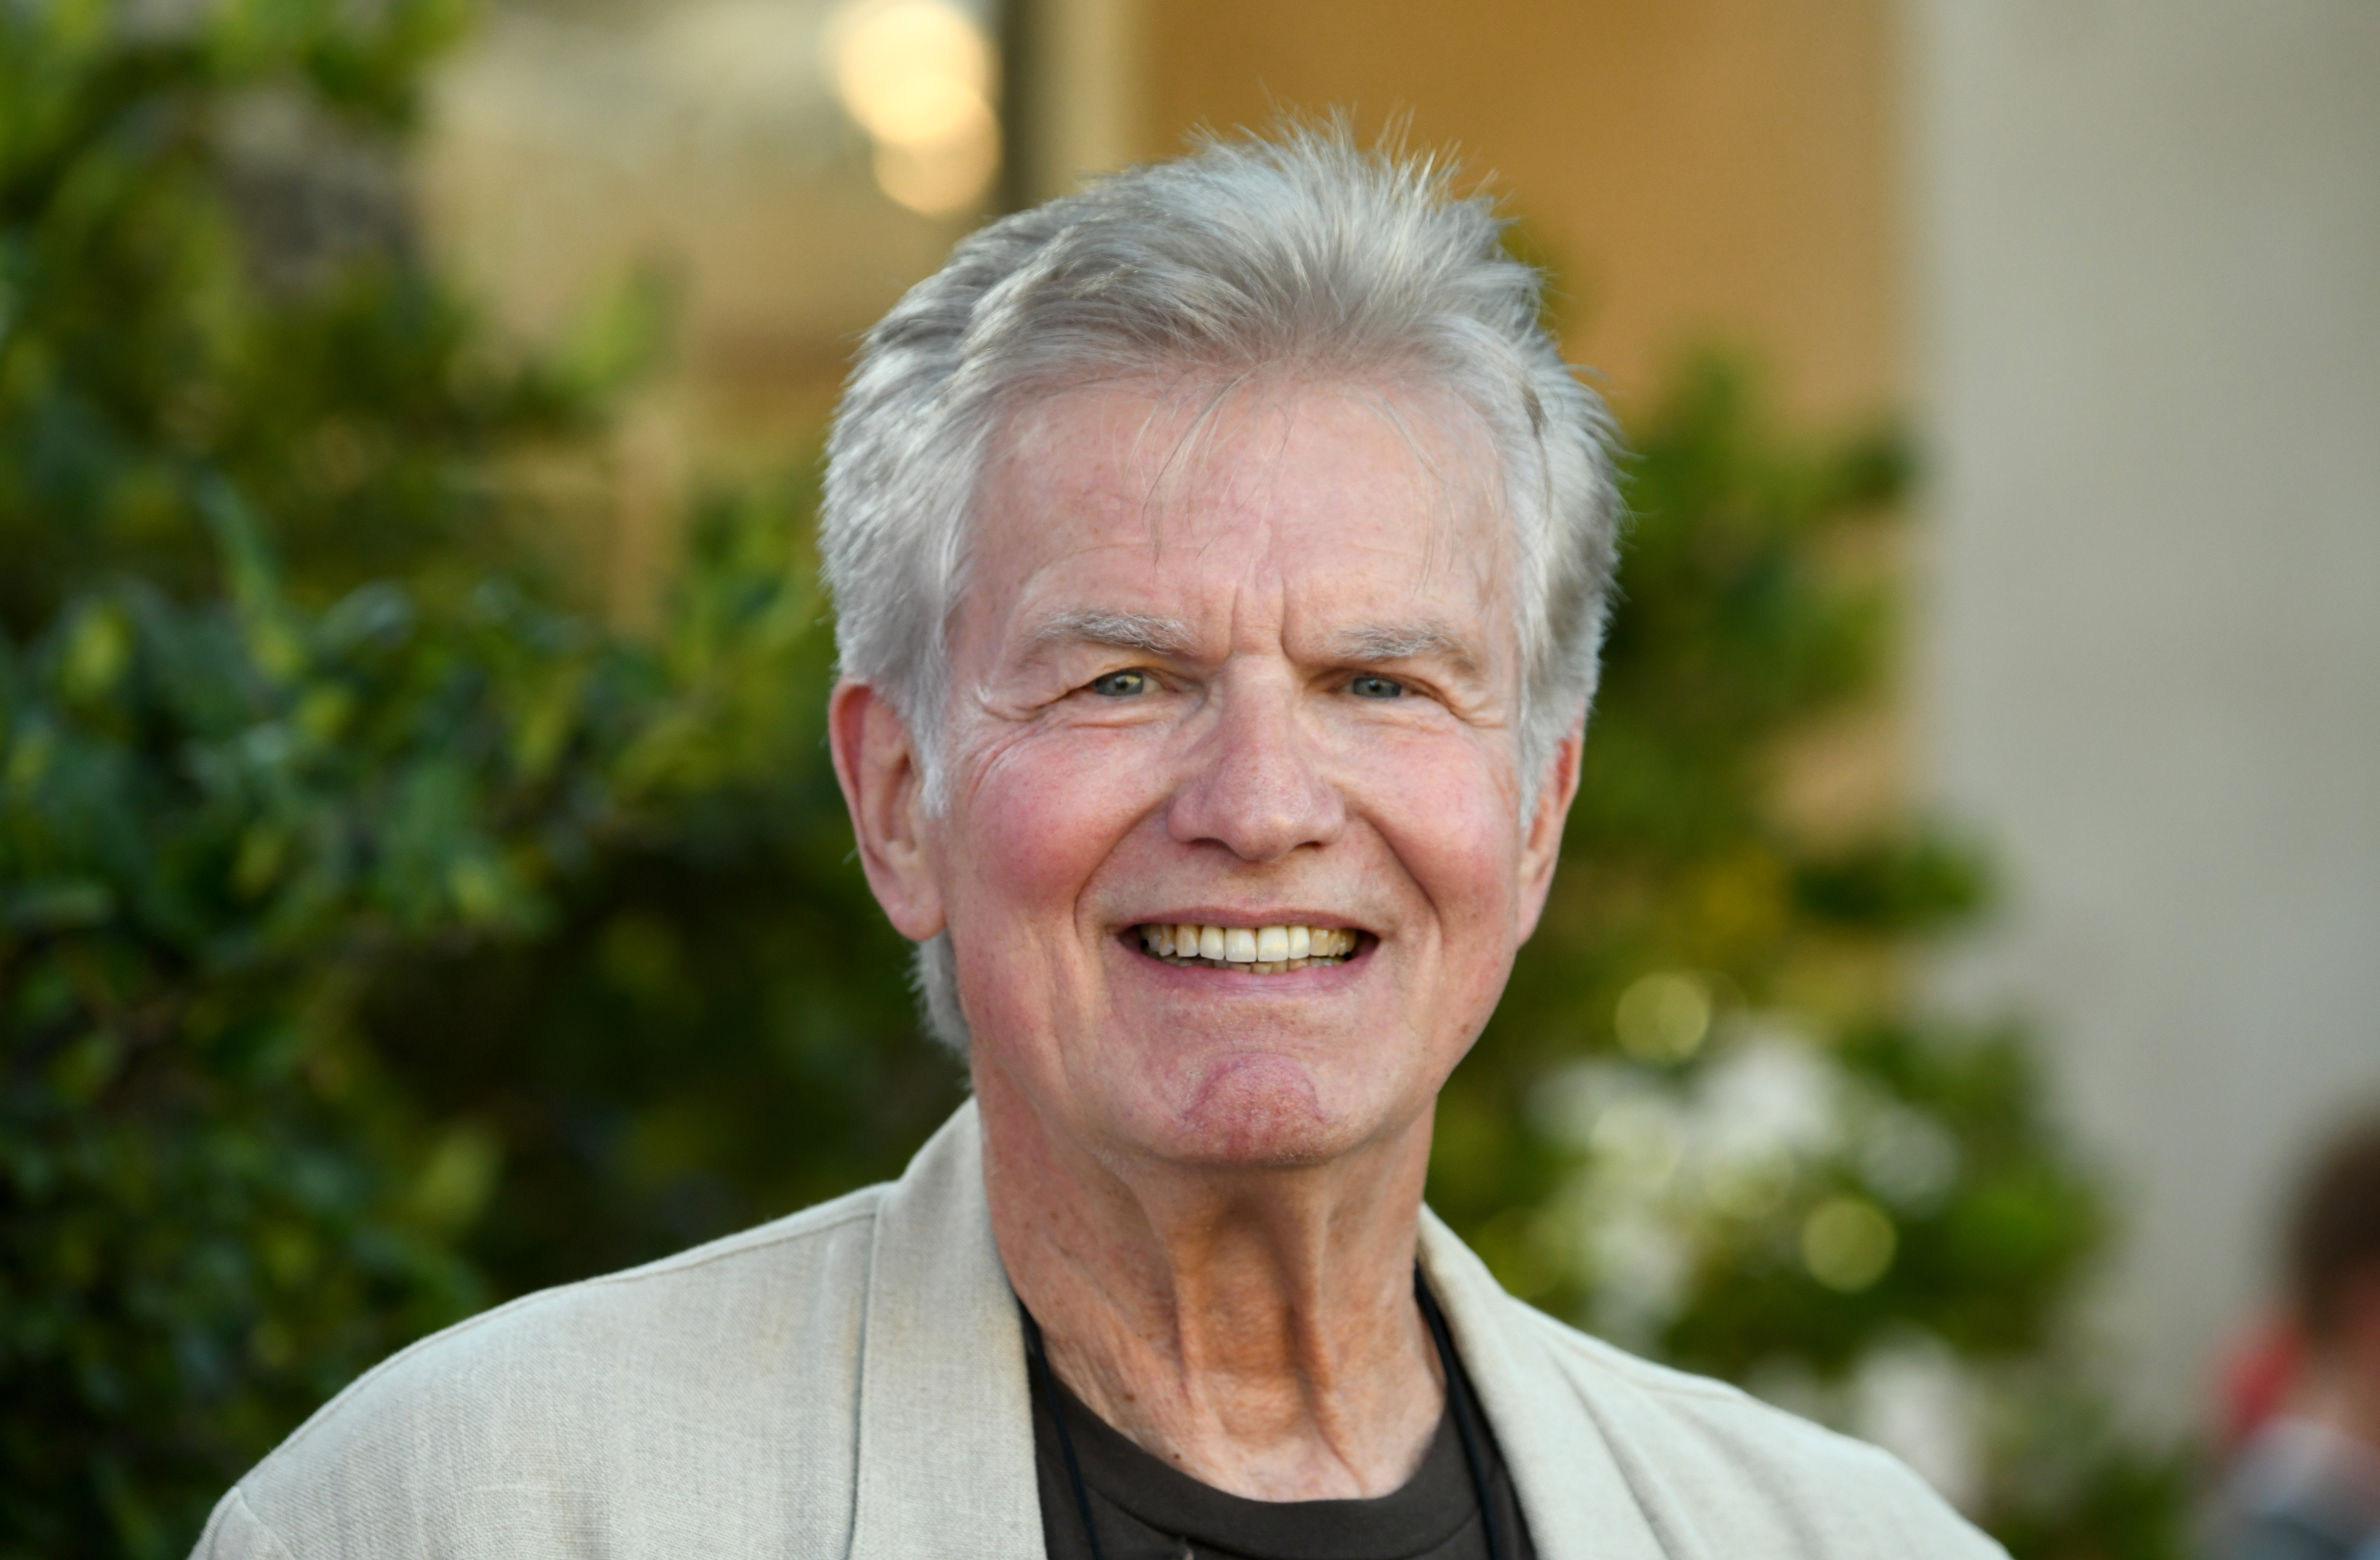 Actor Kent McCord attends the 2019 Festival of Arts Celebrity Benefit Event on August 24, 2019 in Laguna Beach, California. | Source: Getty Images